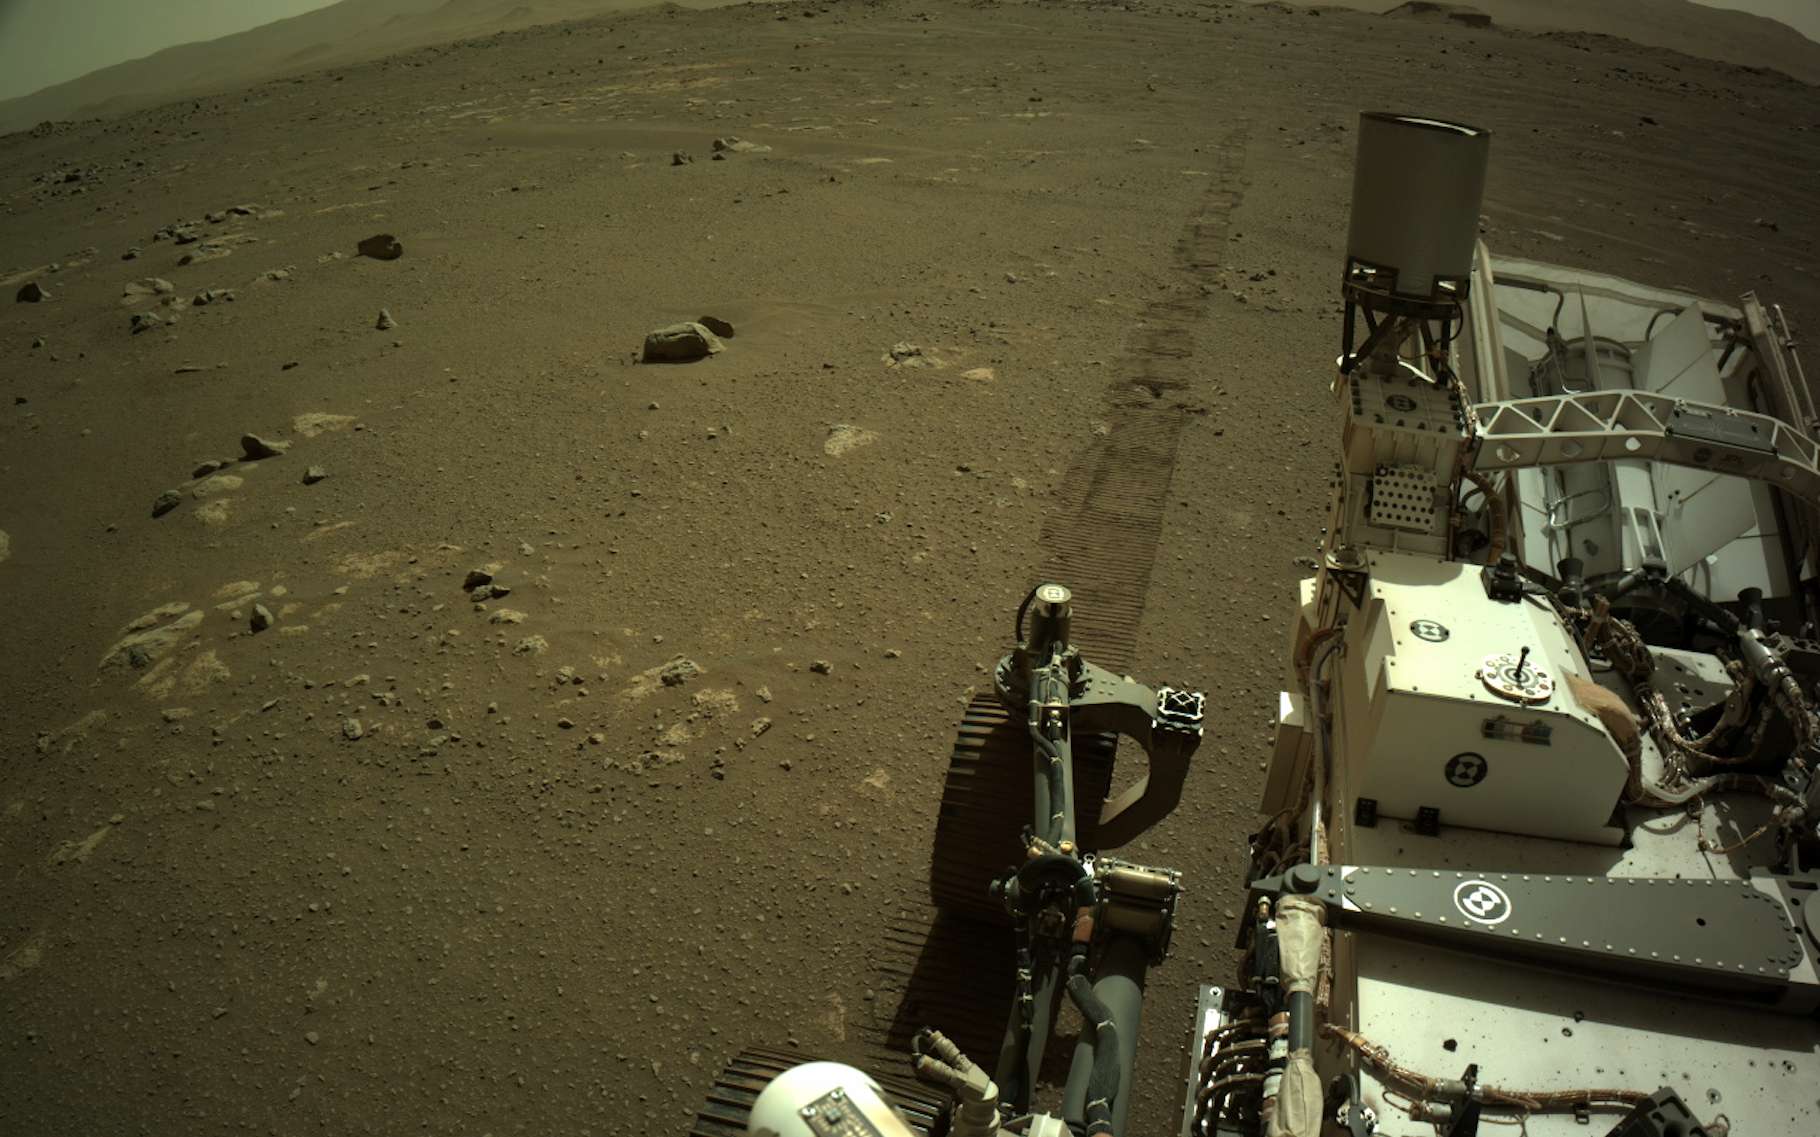 On Mars with persistence: 16 minutes of recorded Rovers